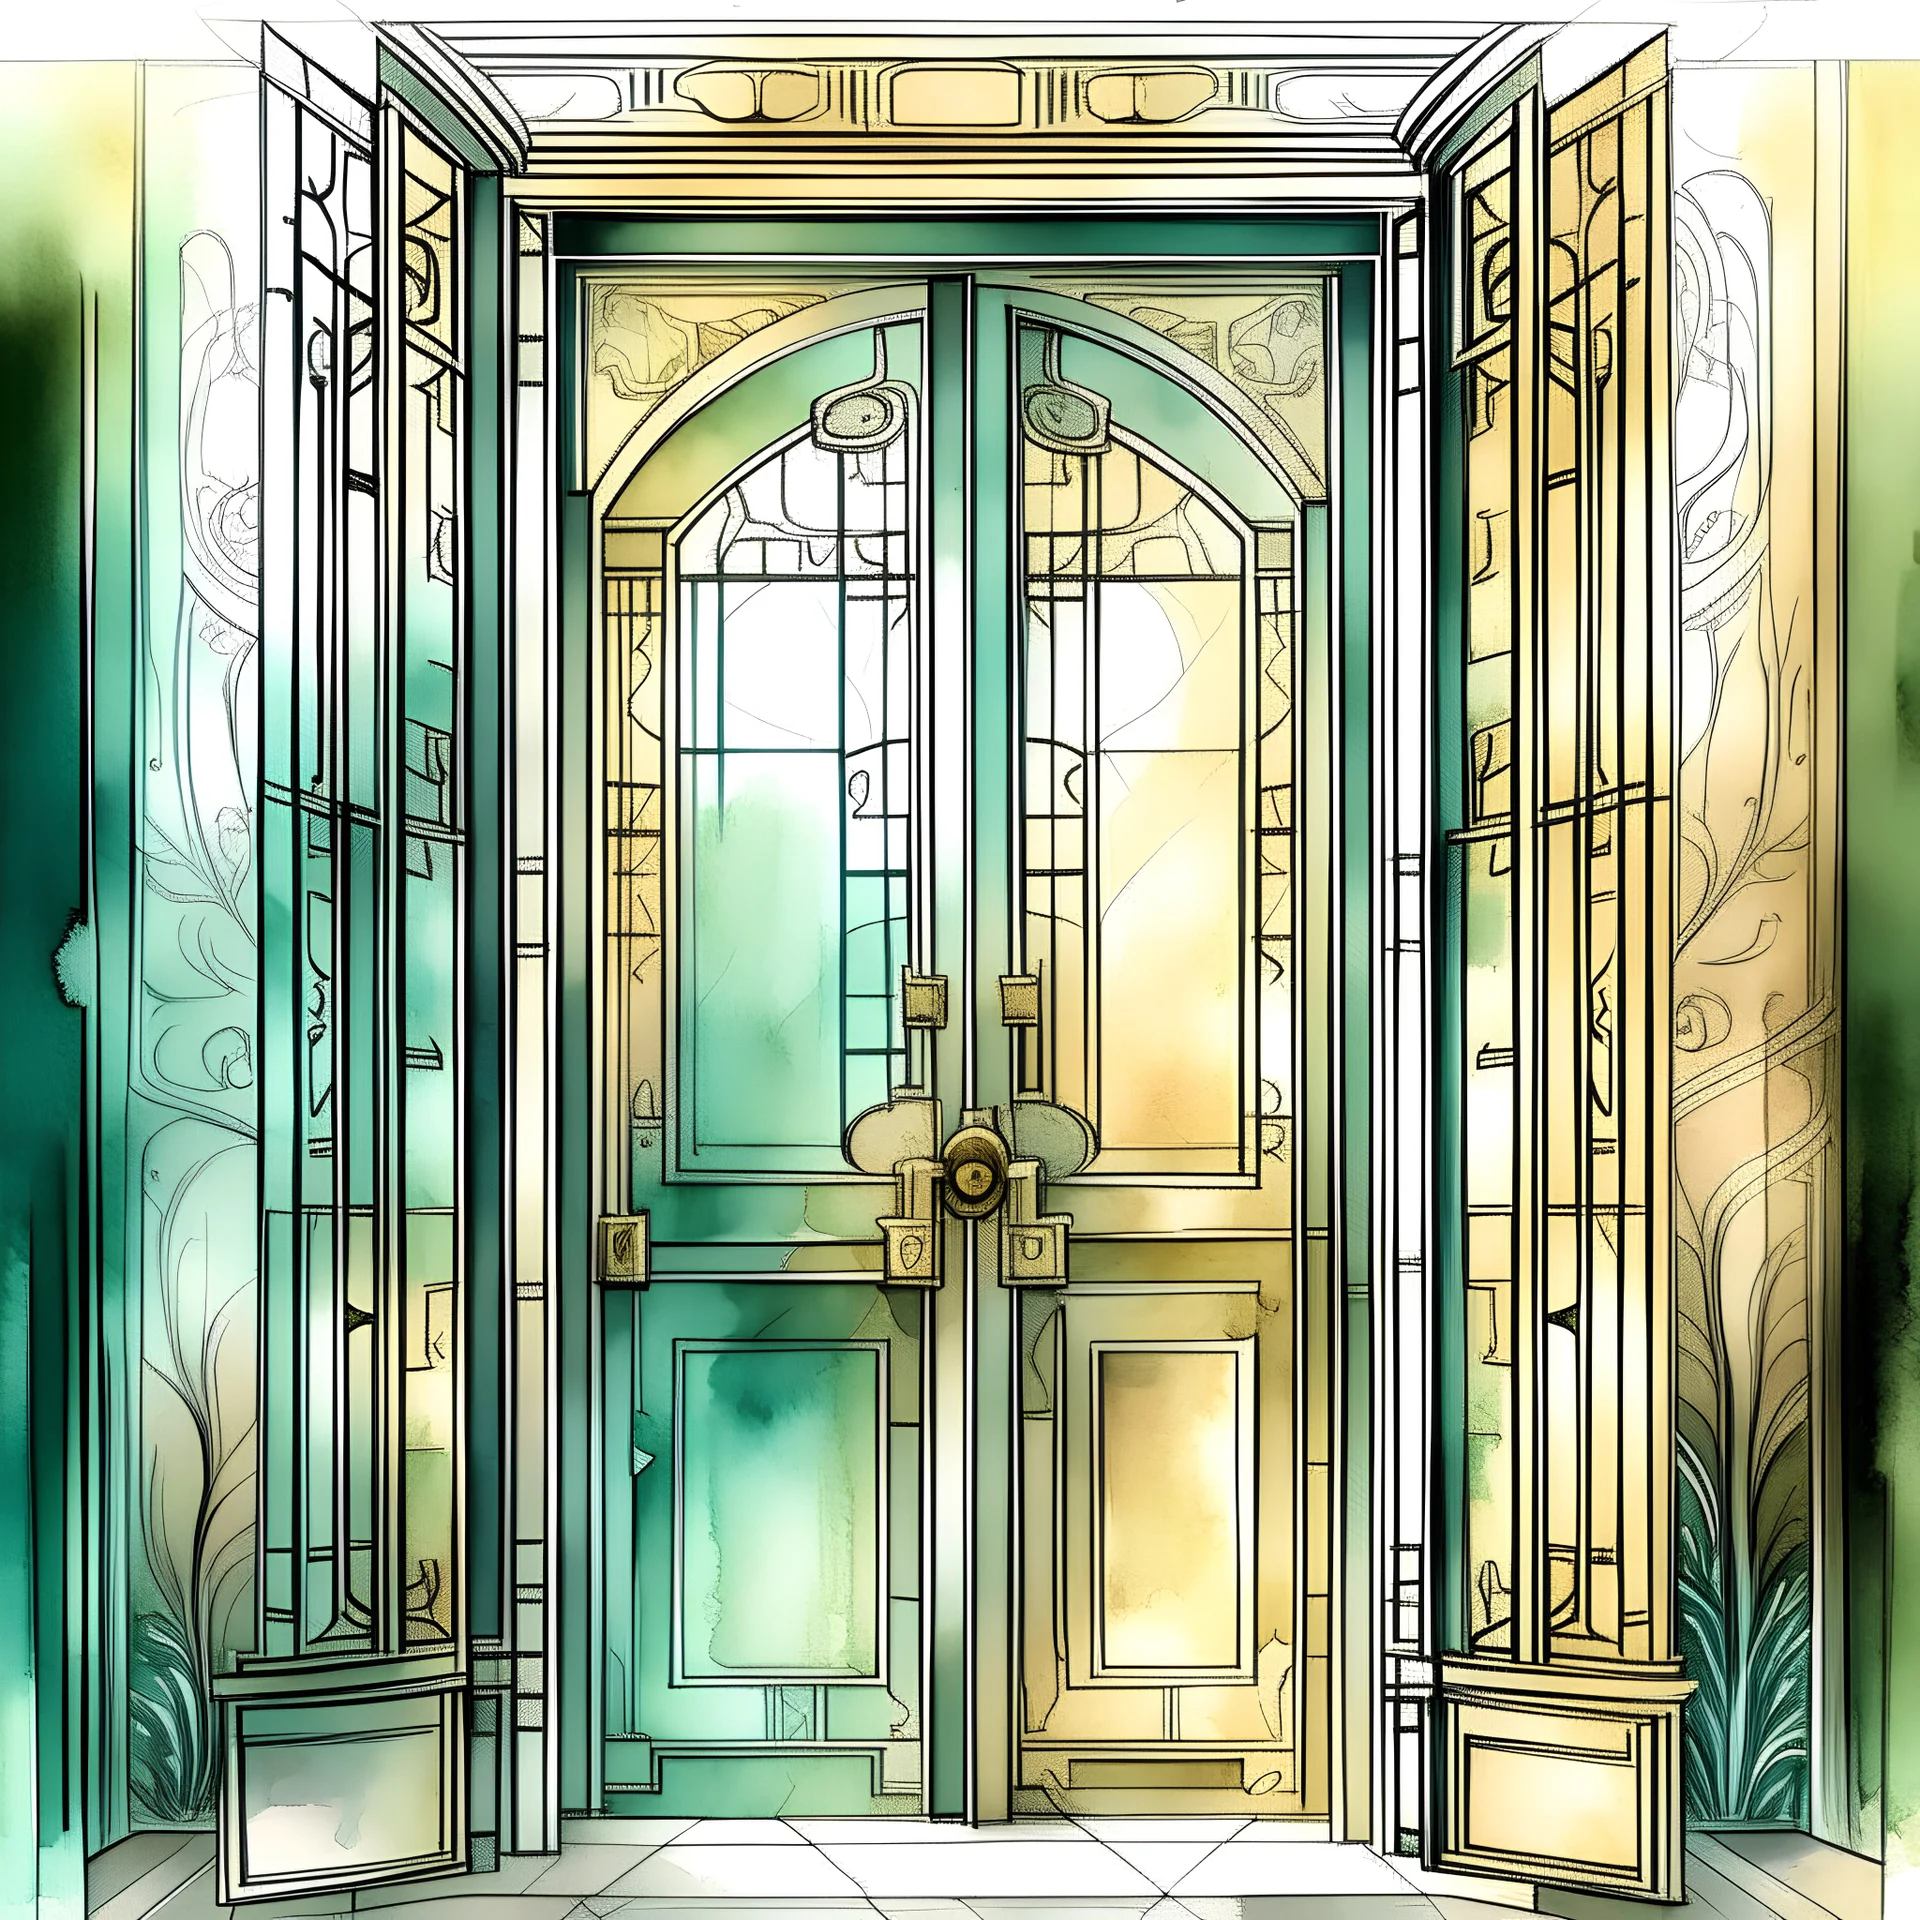 sketch of art deco style speakeasy door with realistic textures, very loose ink and soft watercolor washes